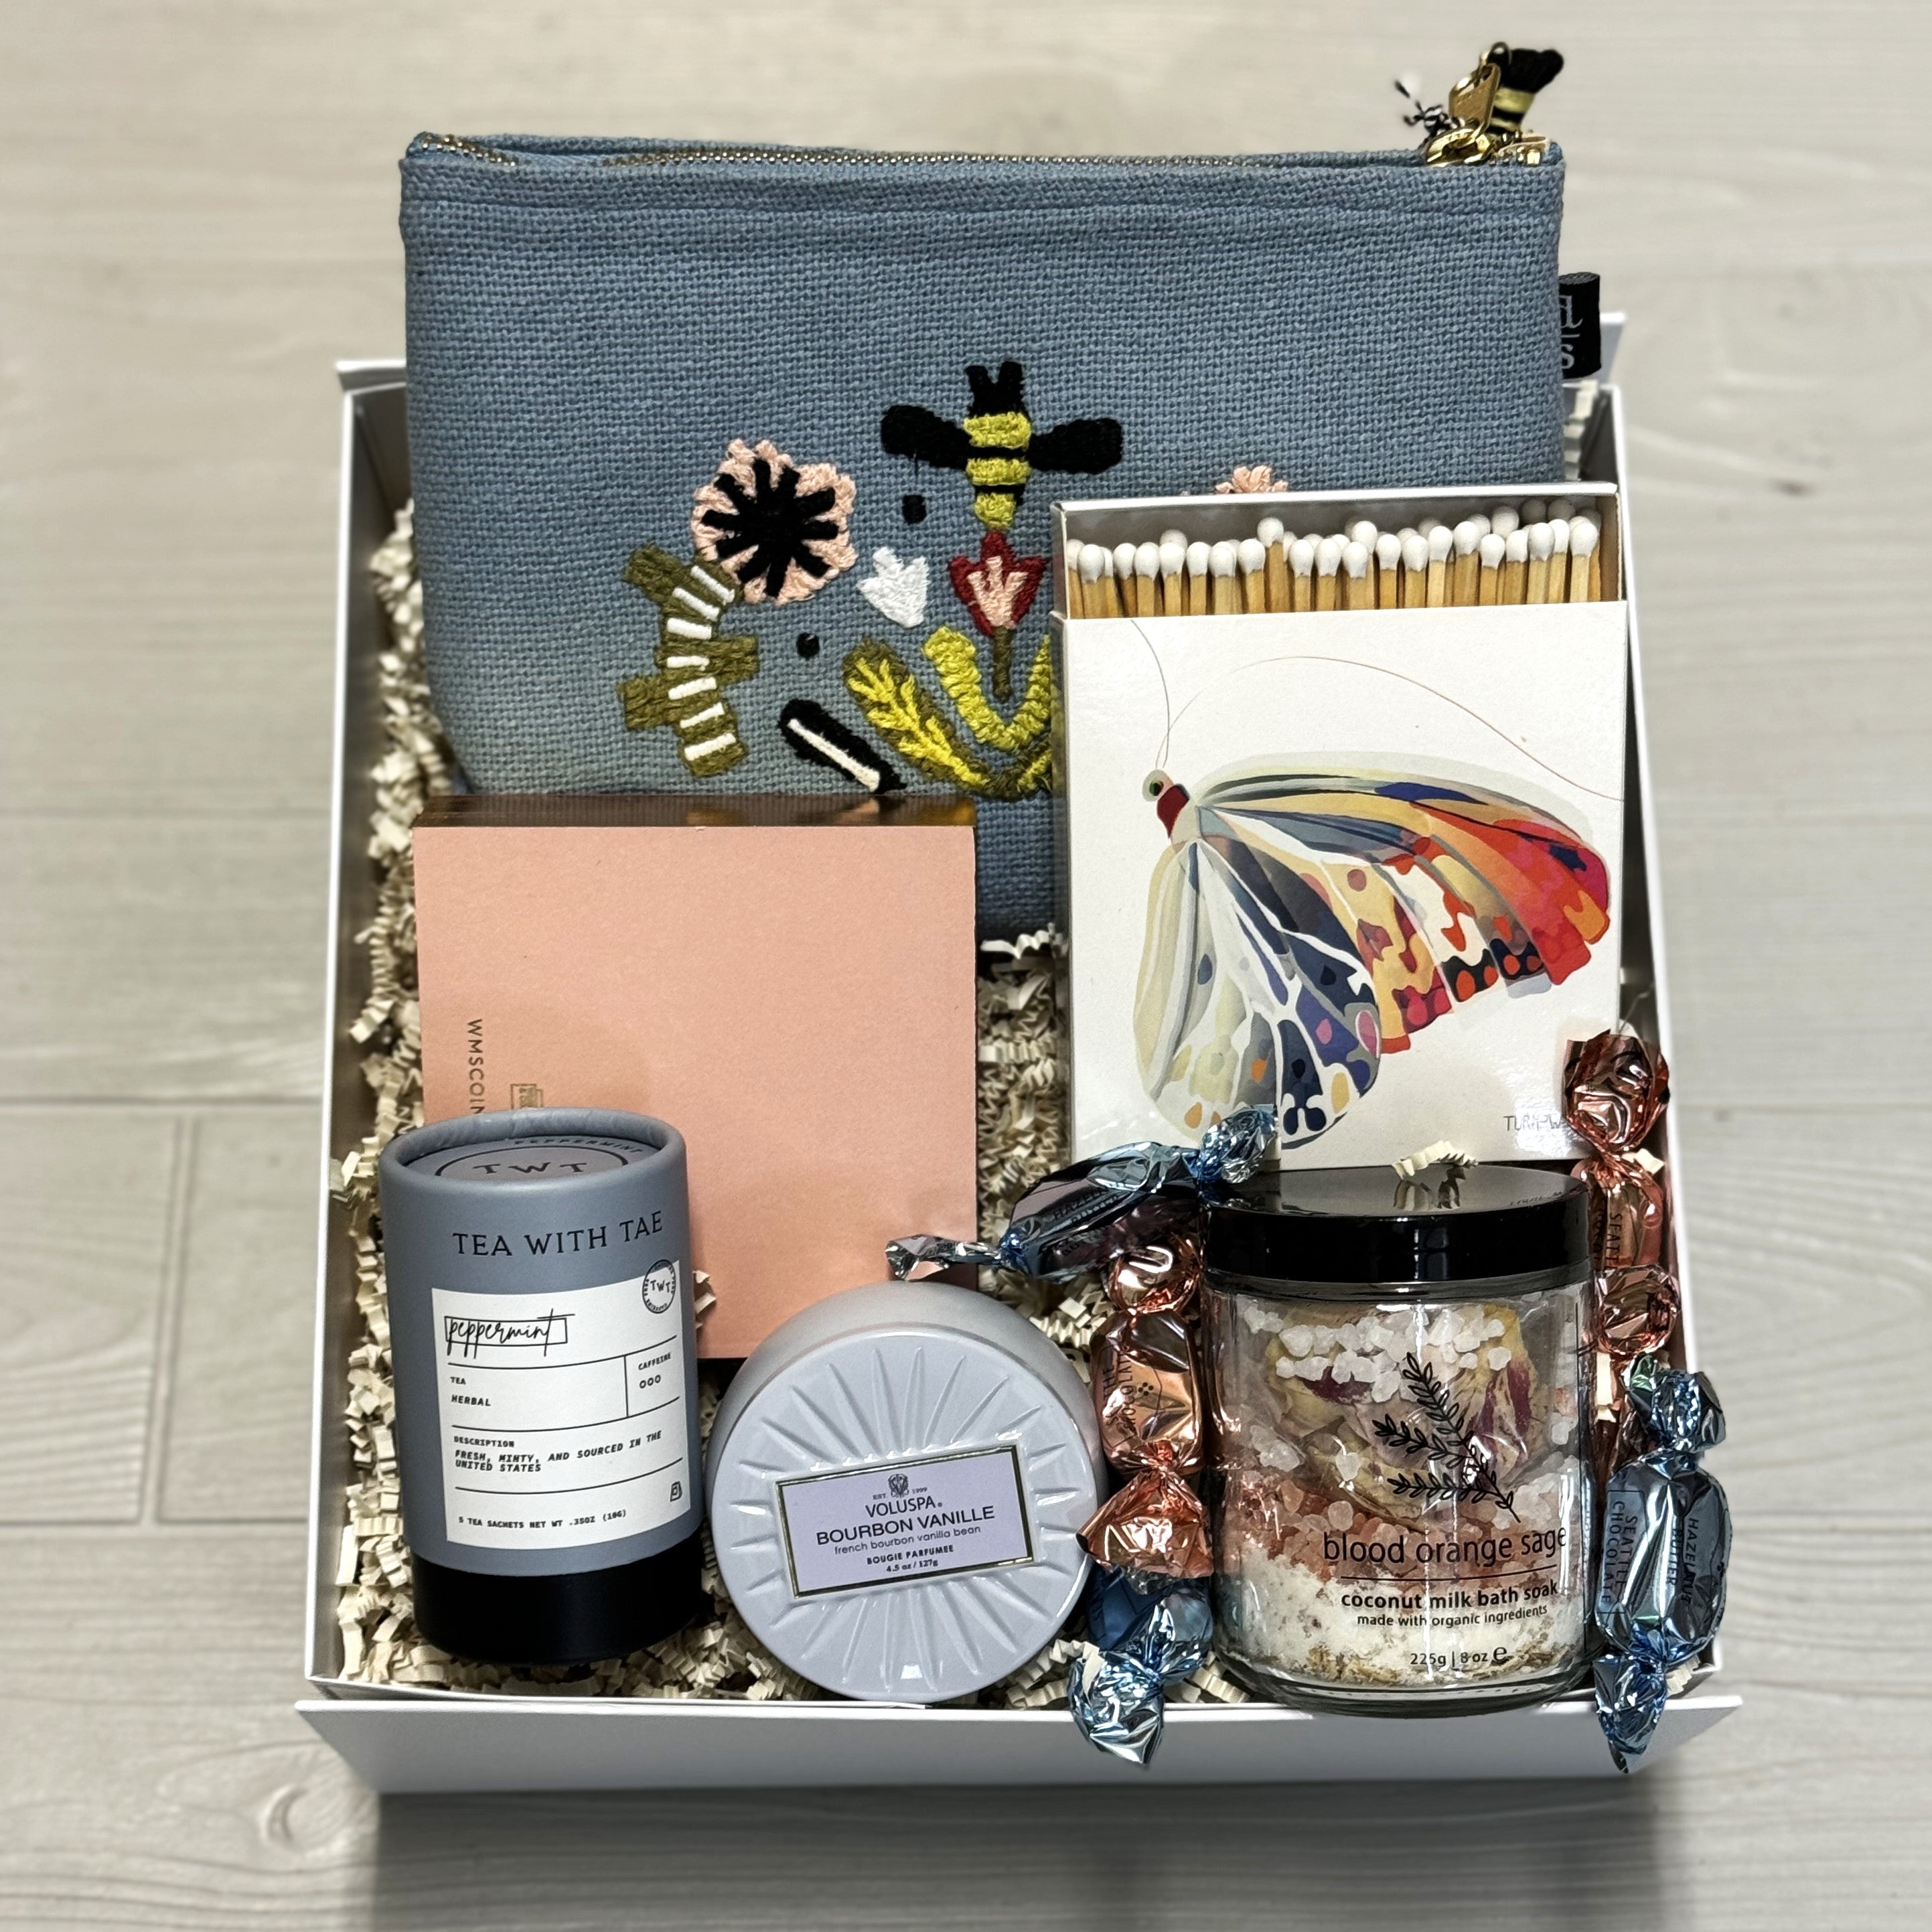 gift for administrative assistant includes a makeup bag, notepad, matches, tea, candle, chocolate, bath salts